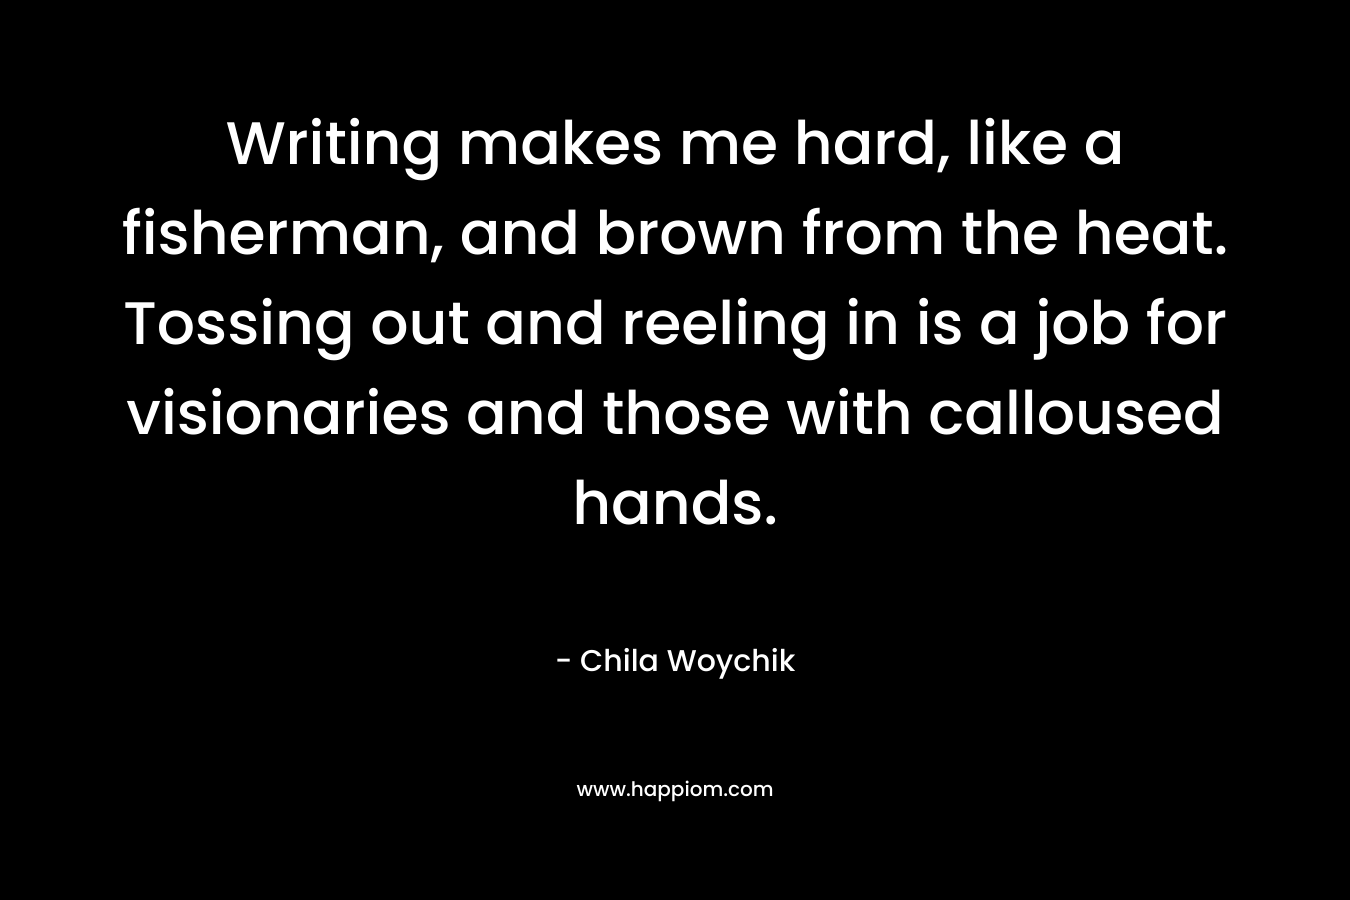 Writing makes me hard, like a fisherman, and brown from the heat. Tossing out and reeling in is a job for visionaries and those with calloused hands. – Chila Woychik